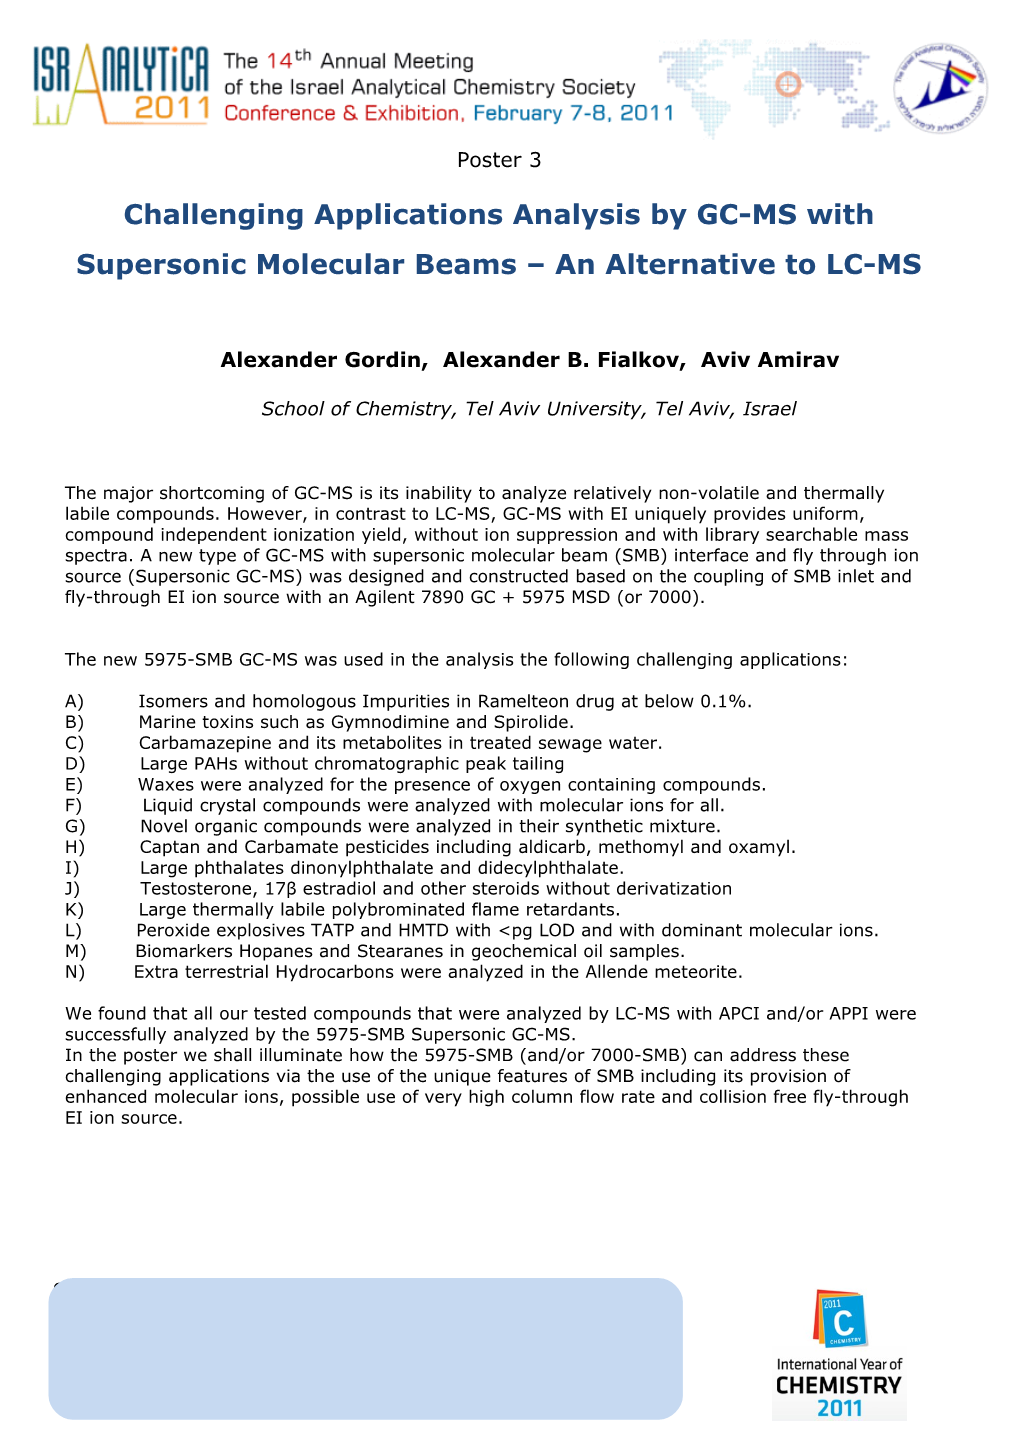 Challenging Applications Analysis by GC-MS with Supersonic Molecular Beams an Alternative